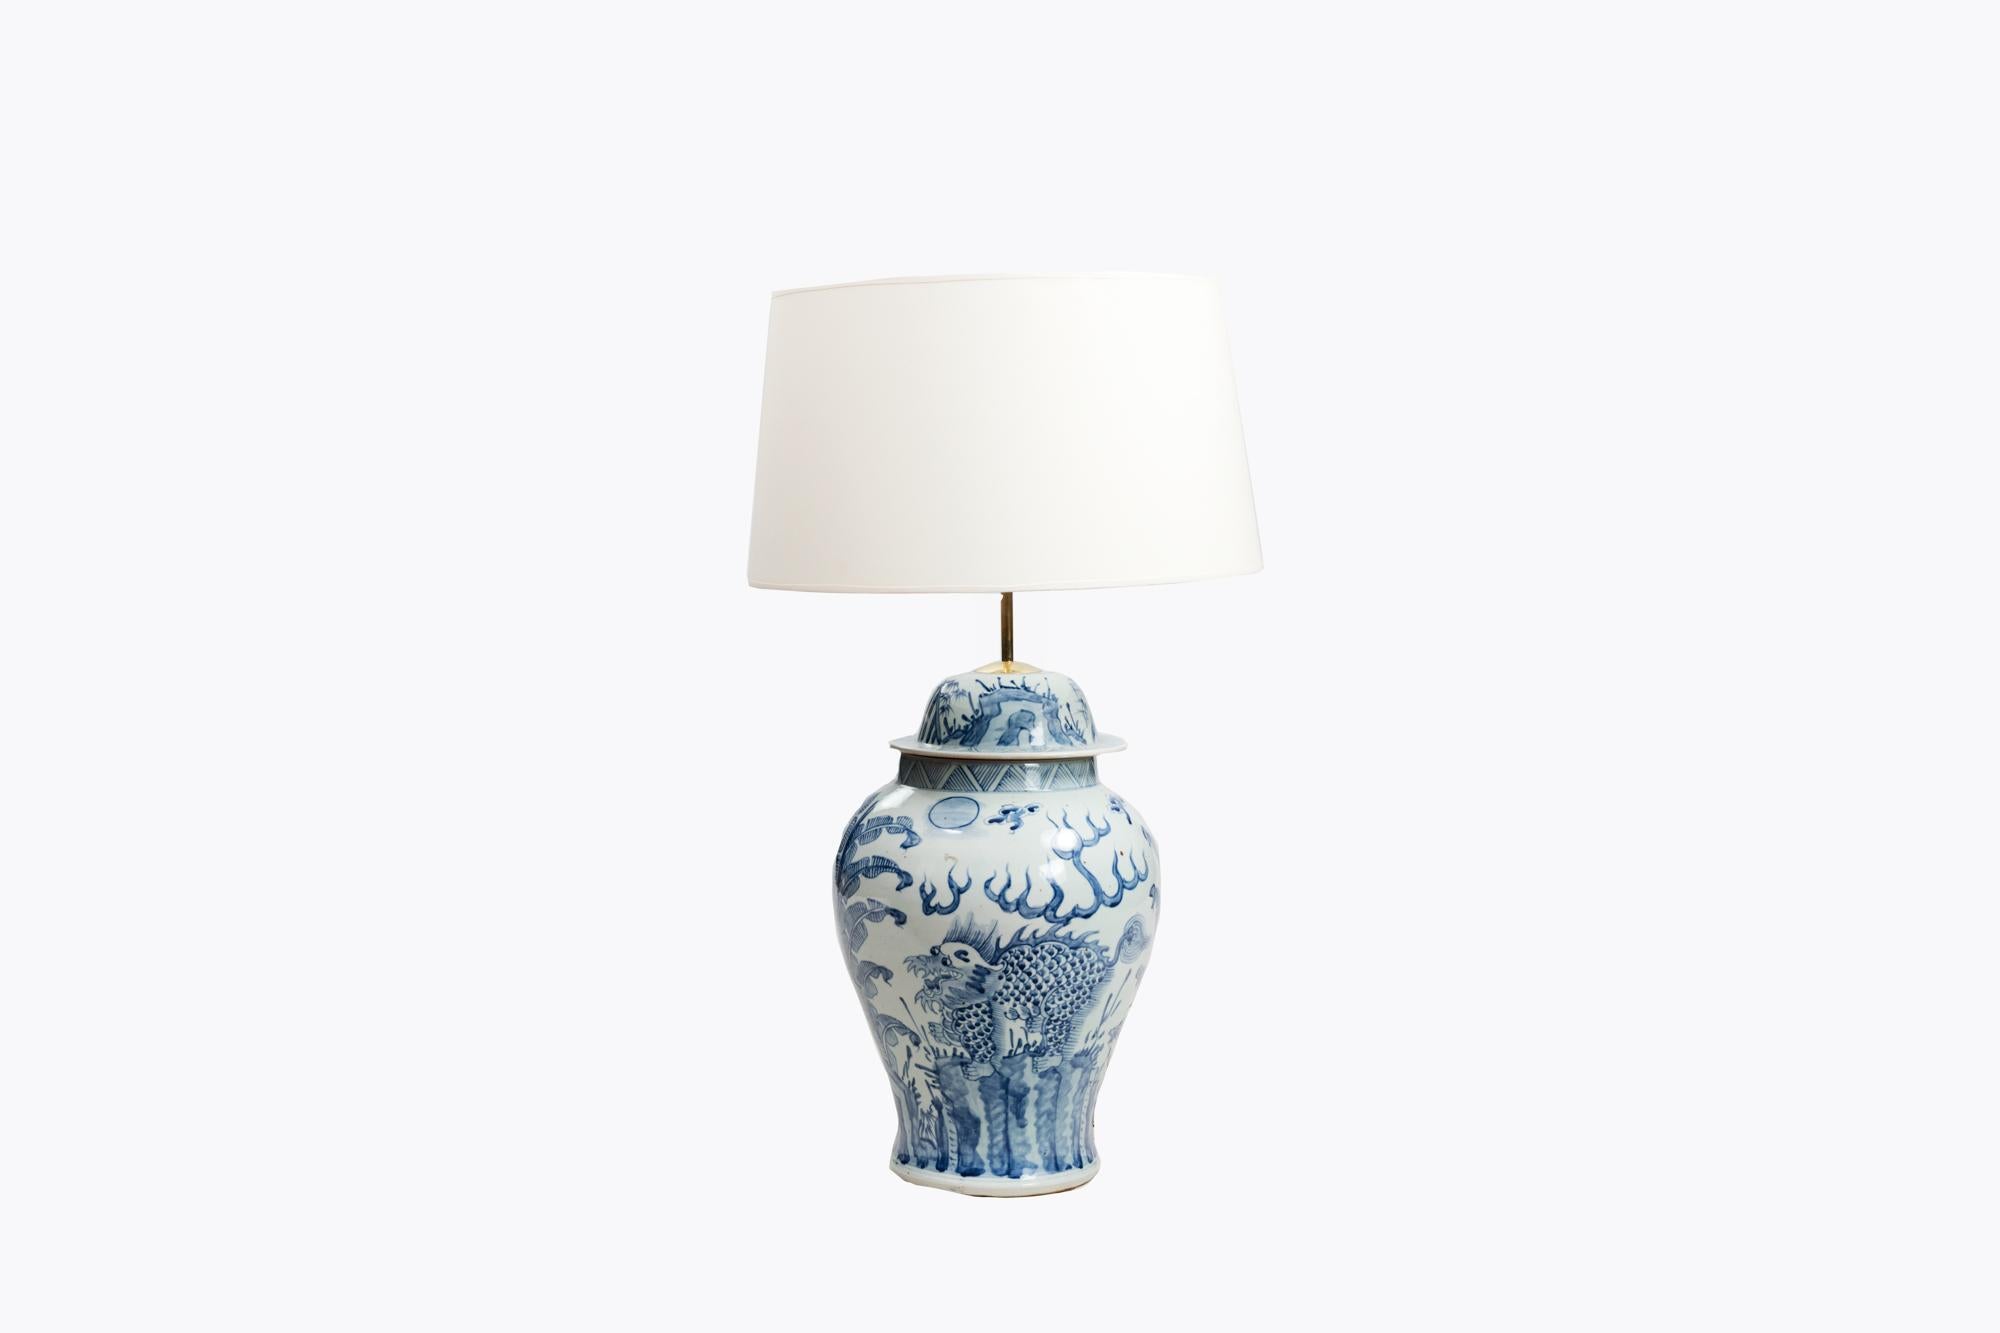 Early 20th Century blue and white ginger jar converted to lamp in the style of the Chinese period of the 18th Century. Ornamented with a floral landscape of leaves, and geometric motifs.